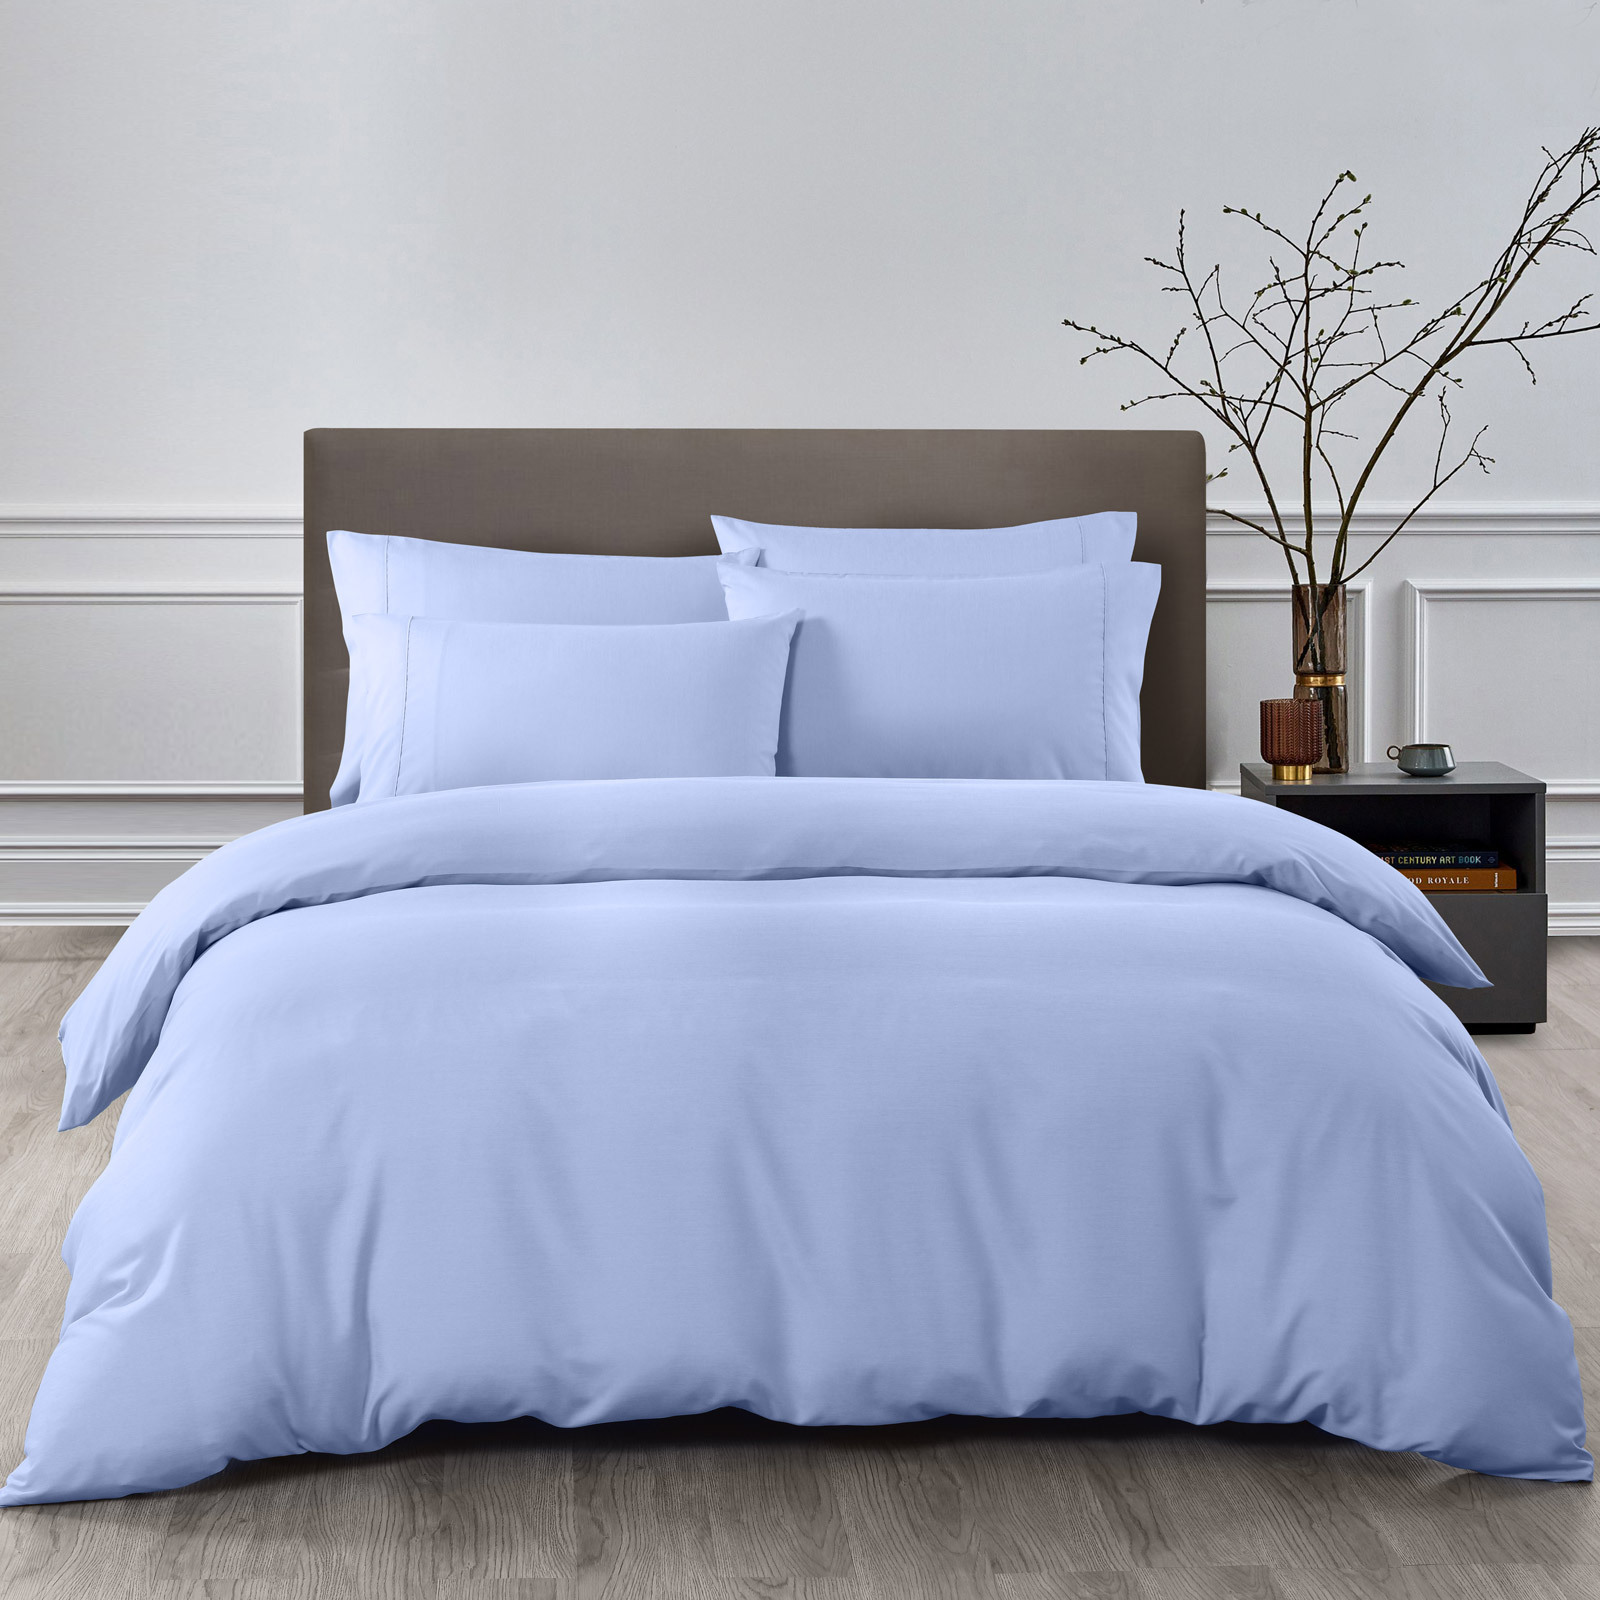 Blue Bamboo Microfibre Quilt Cover, Baby Blue Duvet Cover